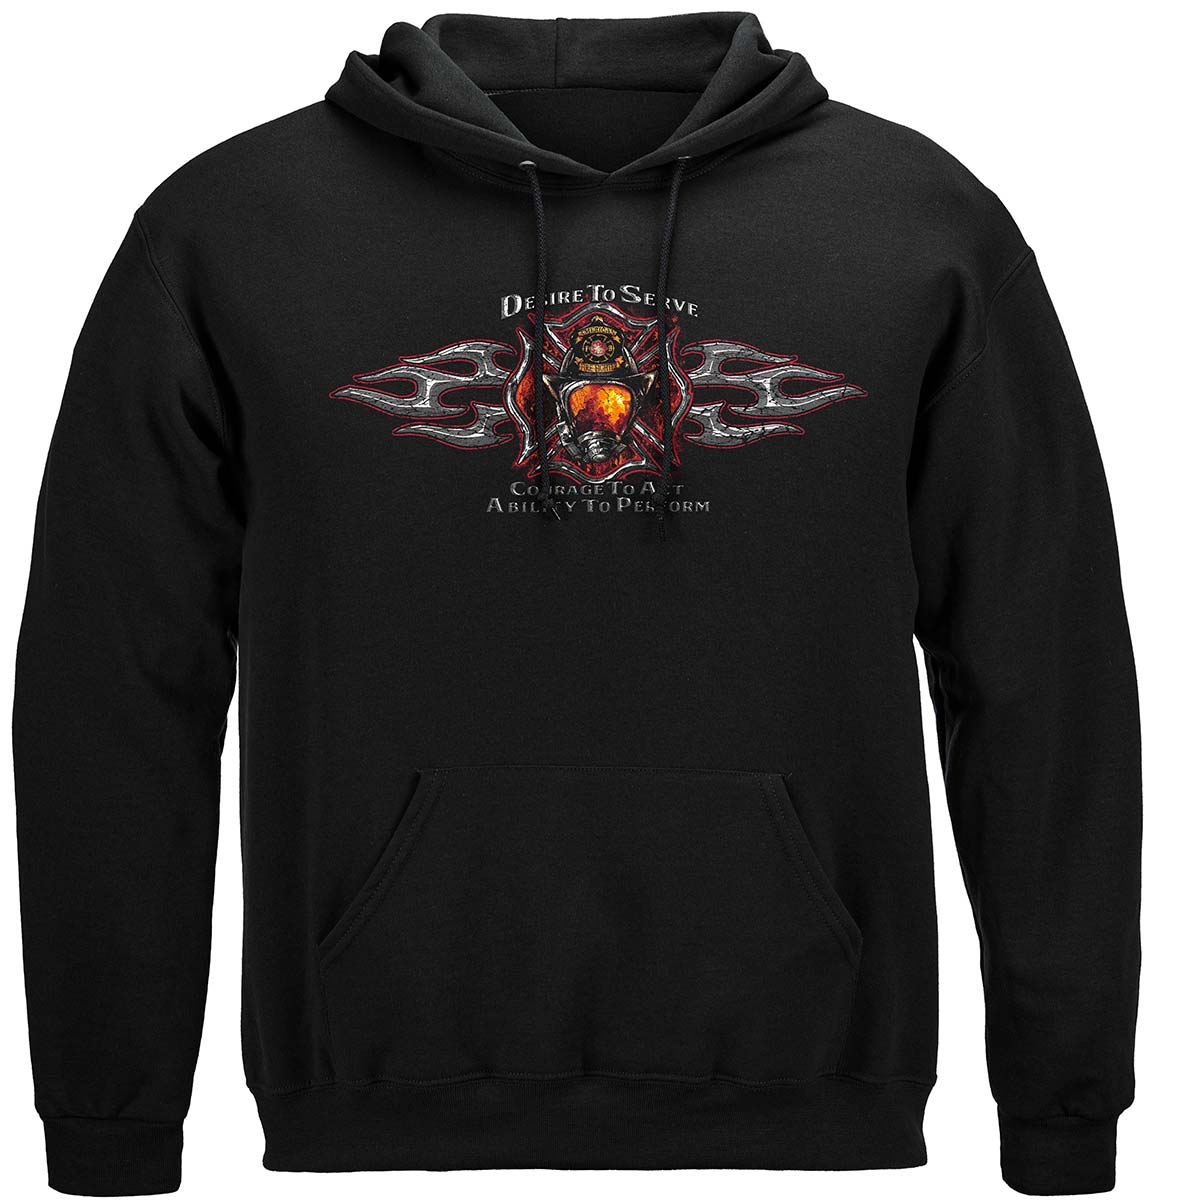 Firefighter Desire To Serve Silver Foil Premium Hooded Sweat Shirt